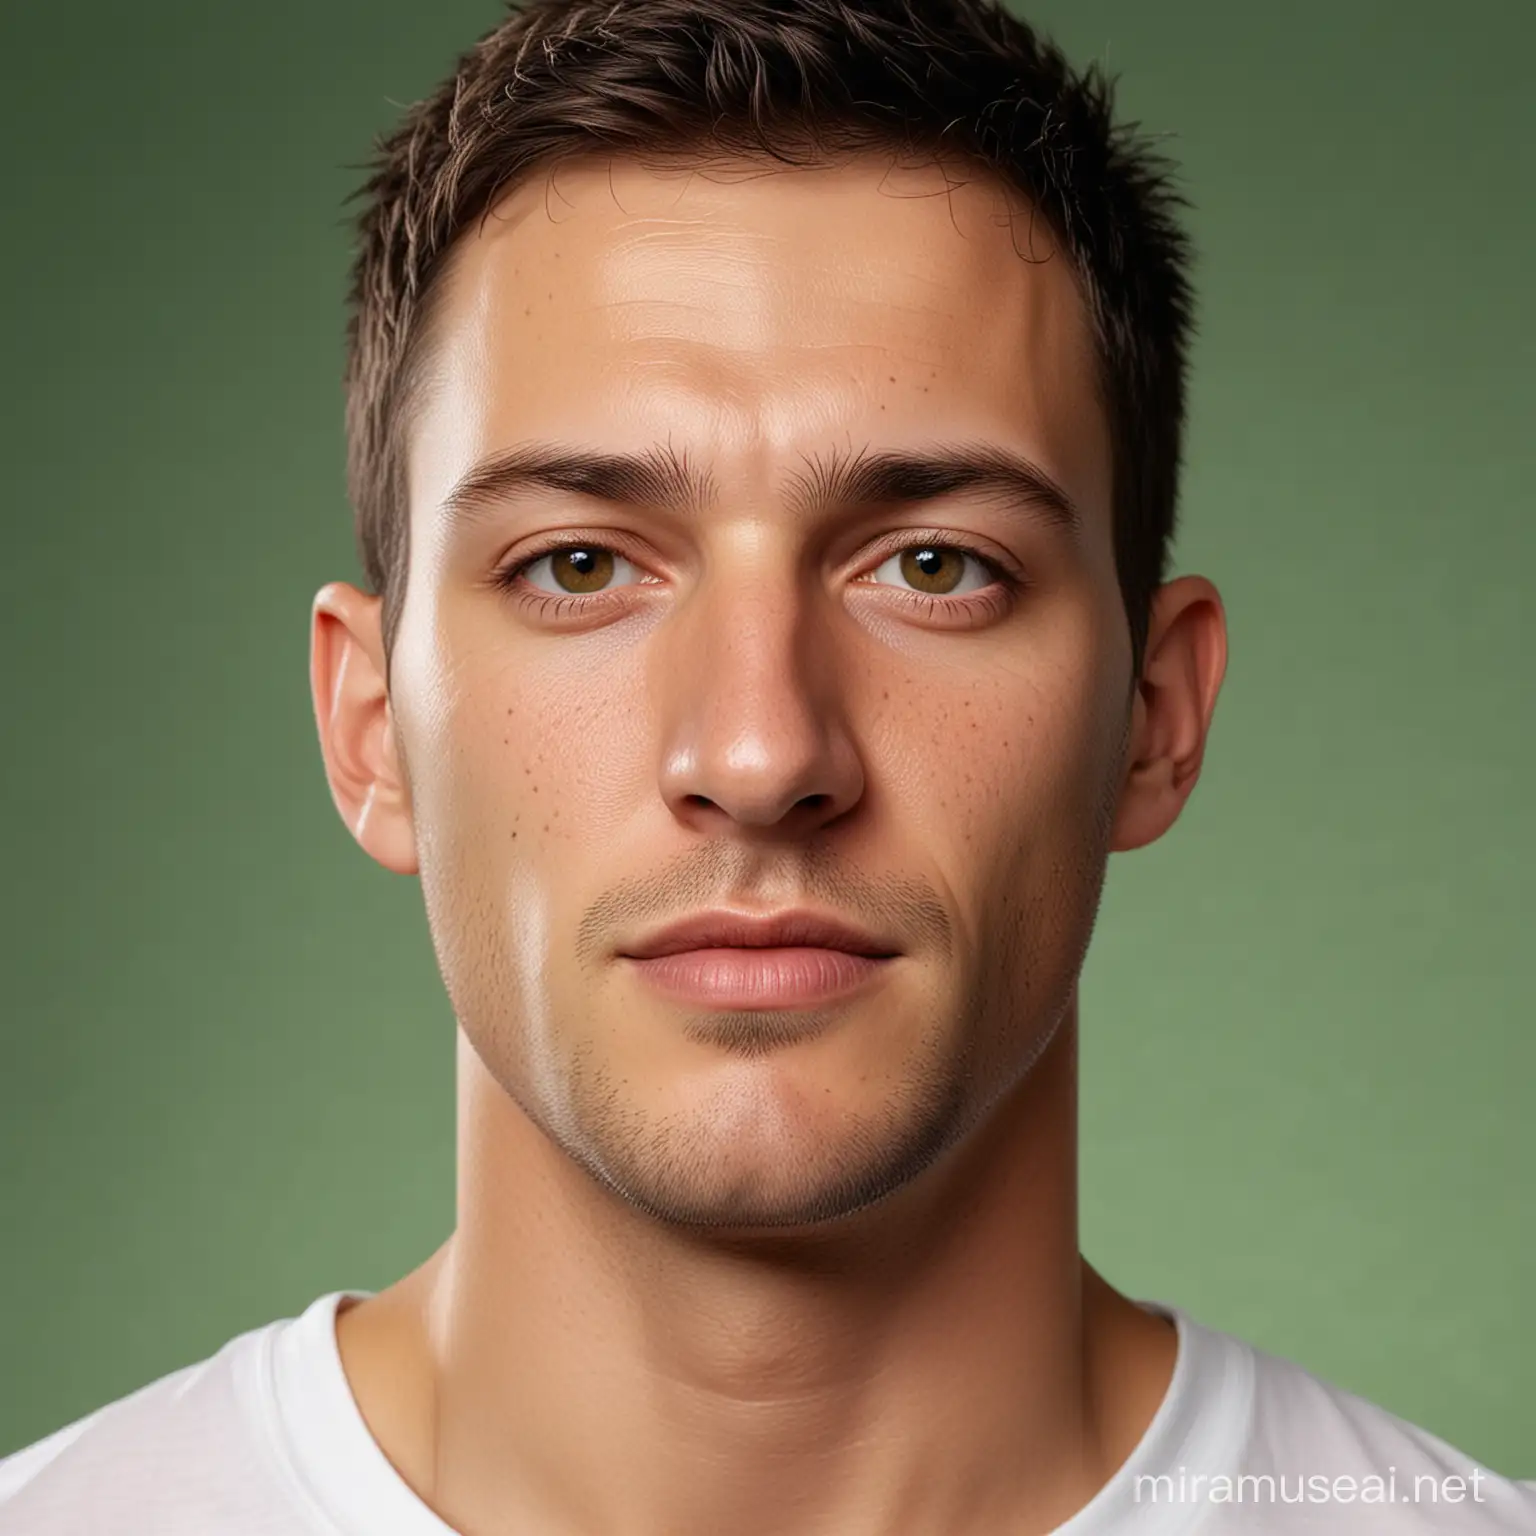 UltraRealistic Portrait of a Shaved European Man with Brown Eyes on Green Background